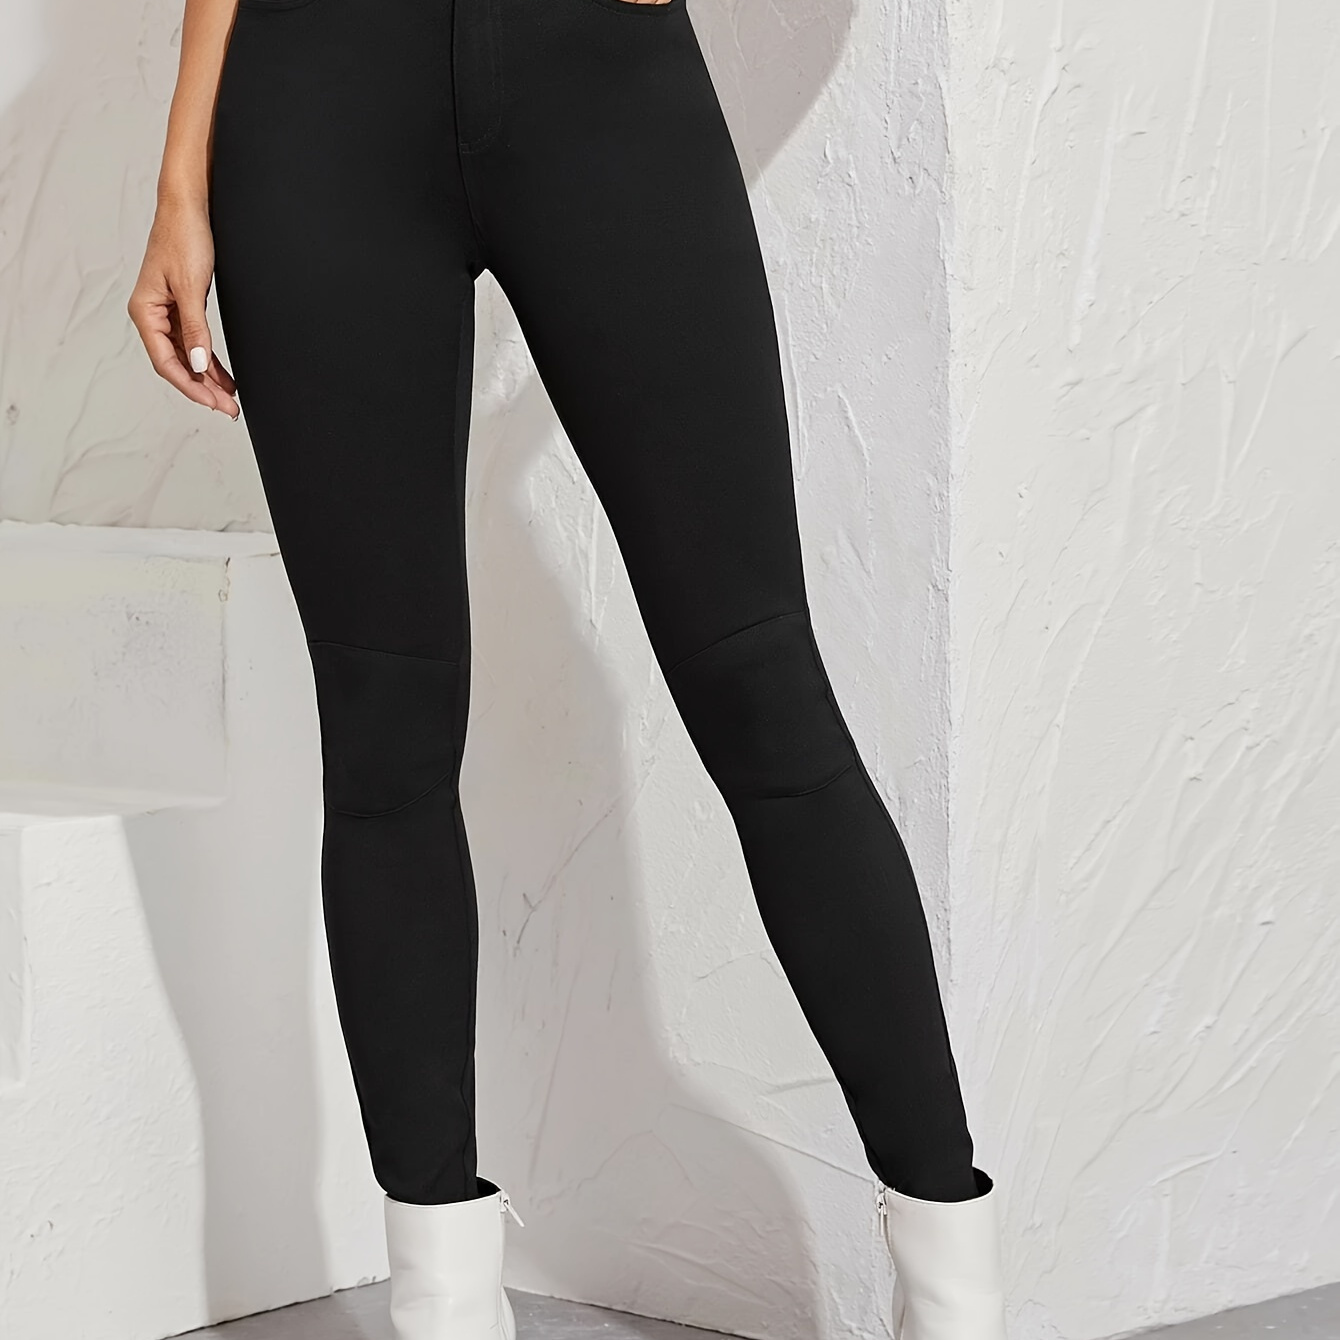 

Women's High Waist Skinny Jeans, Stretchy & Sexy Style, Solid Black Color Denim Pants, Casual Zipper Button Closure With Pockets For Autumn